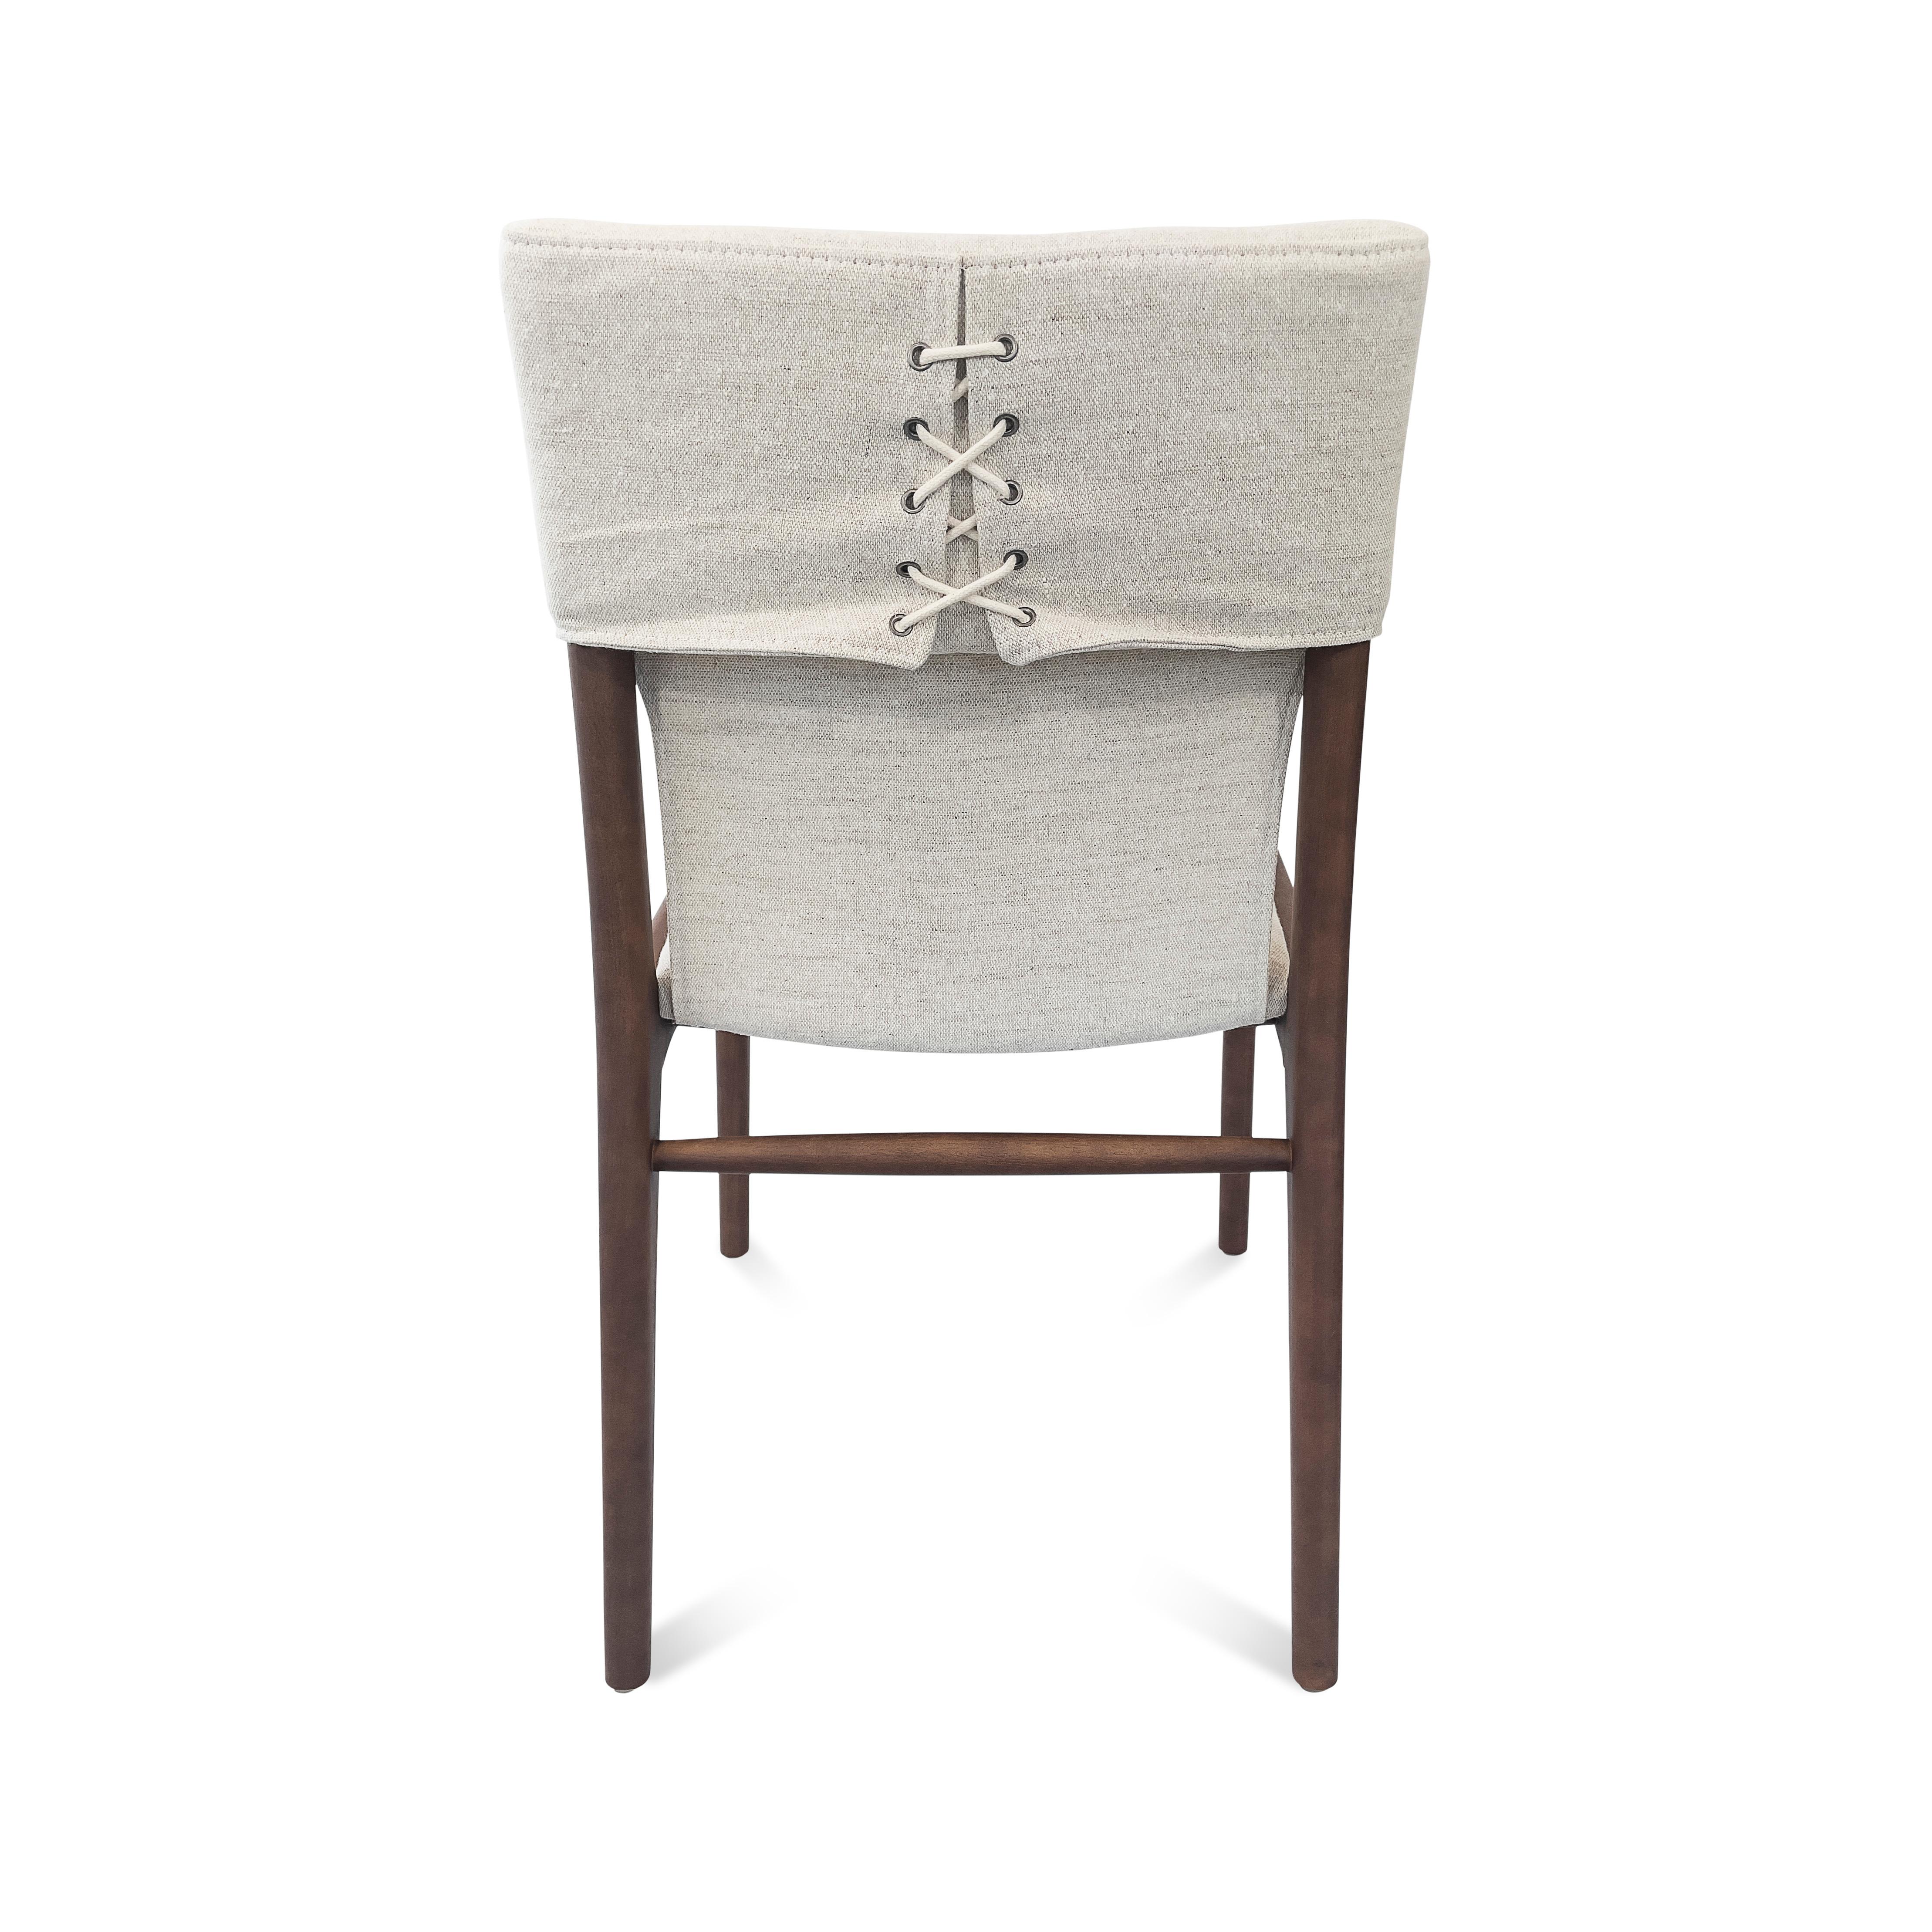 Tress in Light Beige Fabric Upholstered Dining Chair in Walnut Wood, set of 2 In New Condition For Sale In Miami, FL